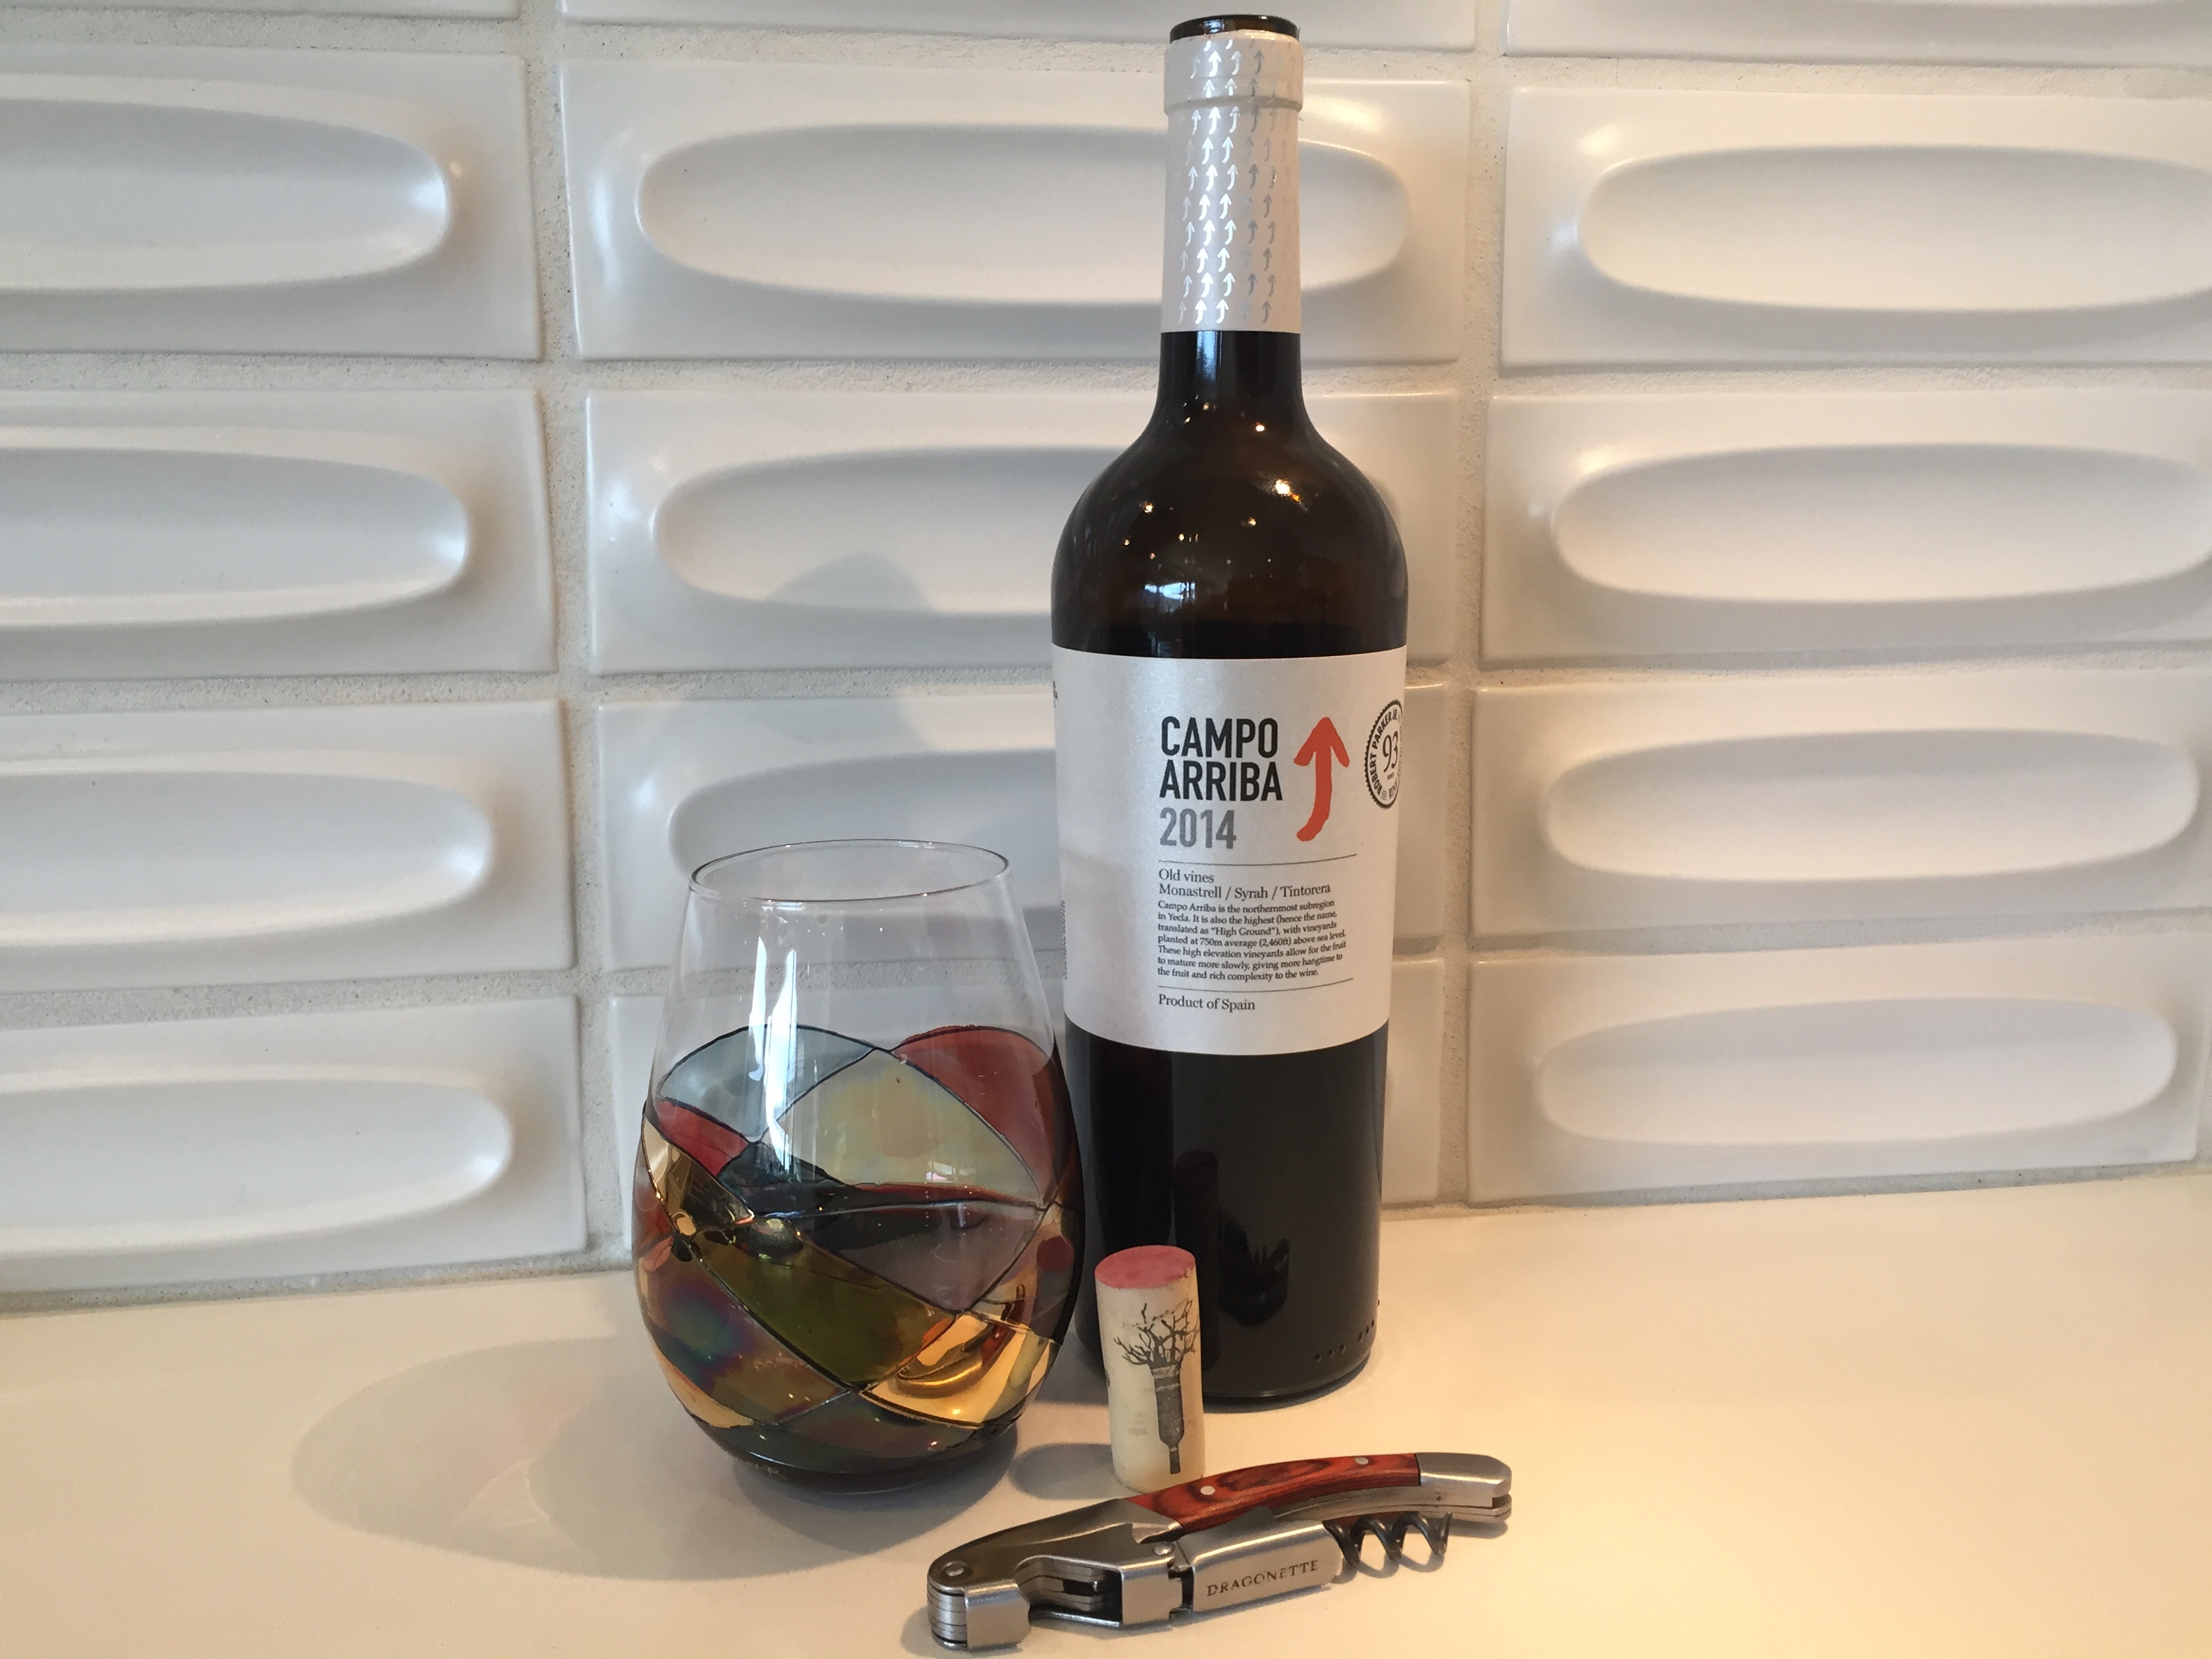 Glass and bottle of Campo Arriba 2014 red wine from Costco